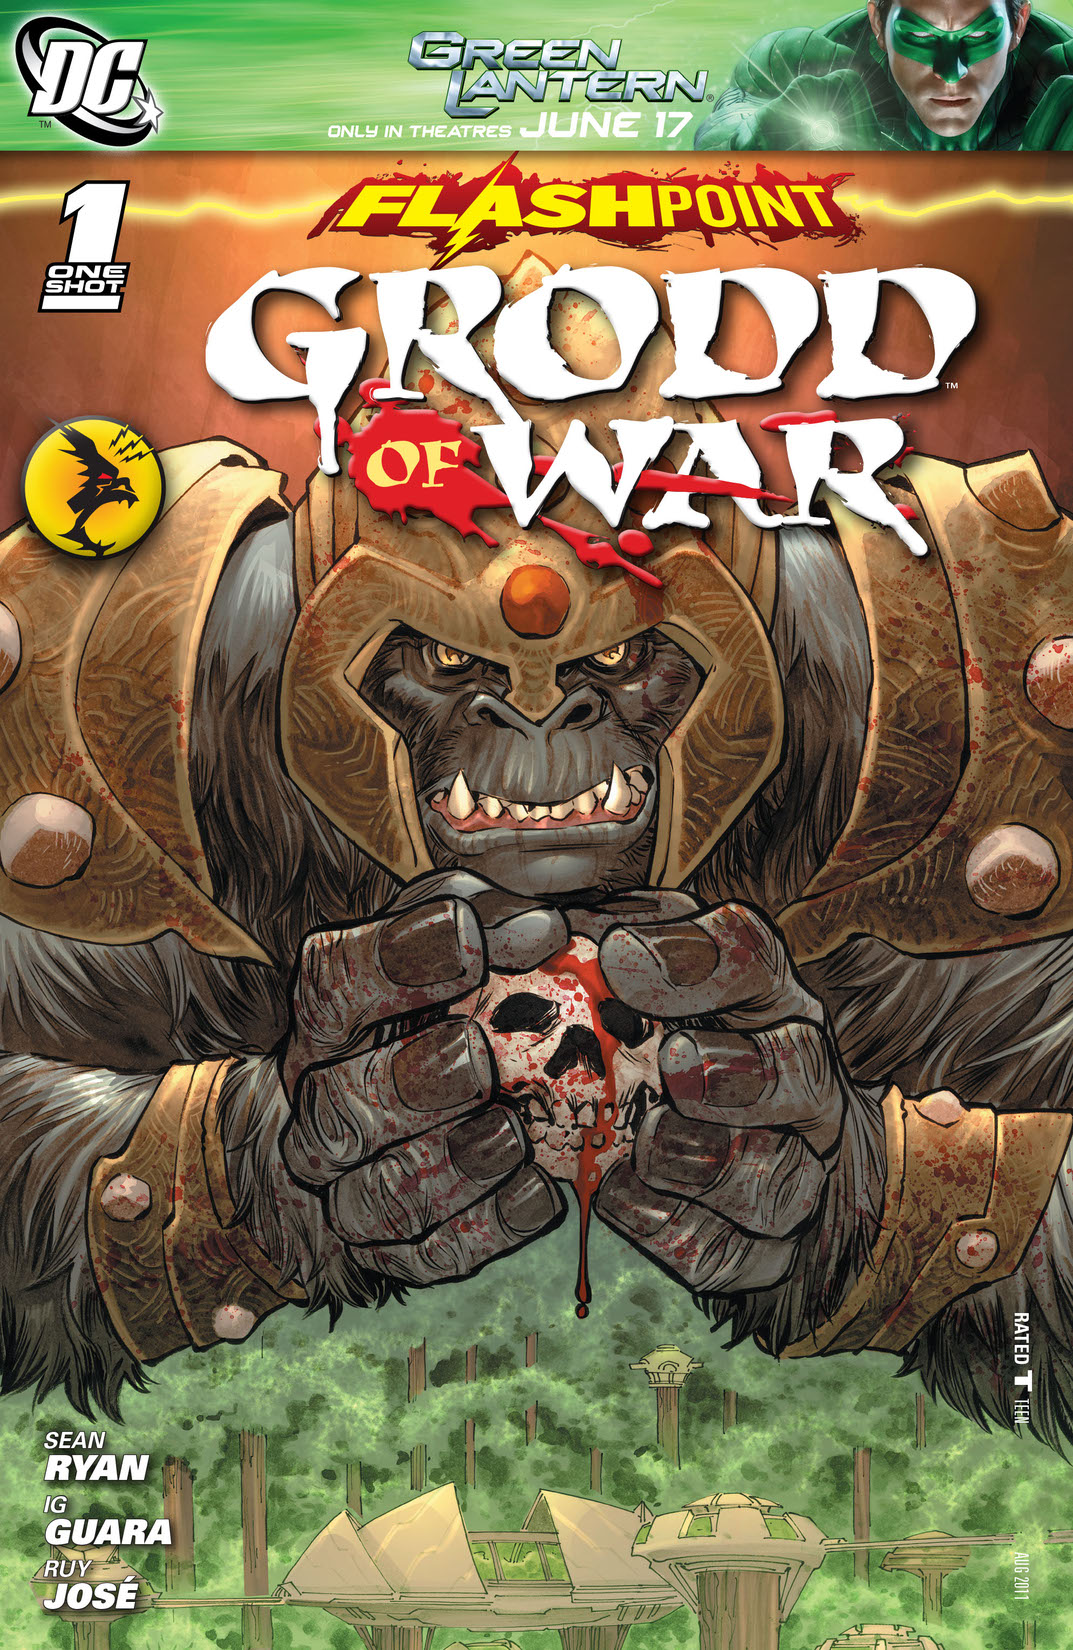 Flashpoint: Grodd of War #1 preview images